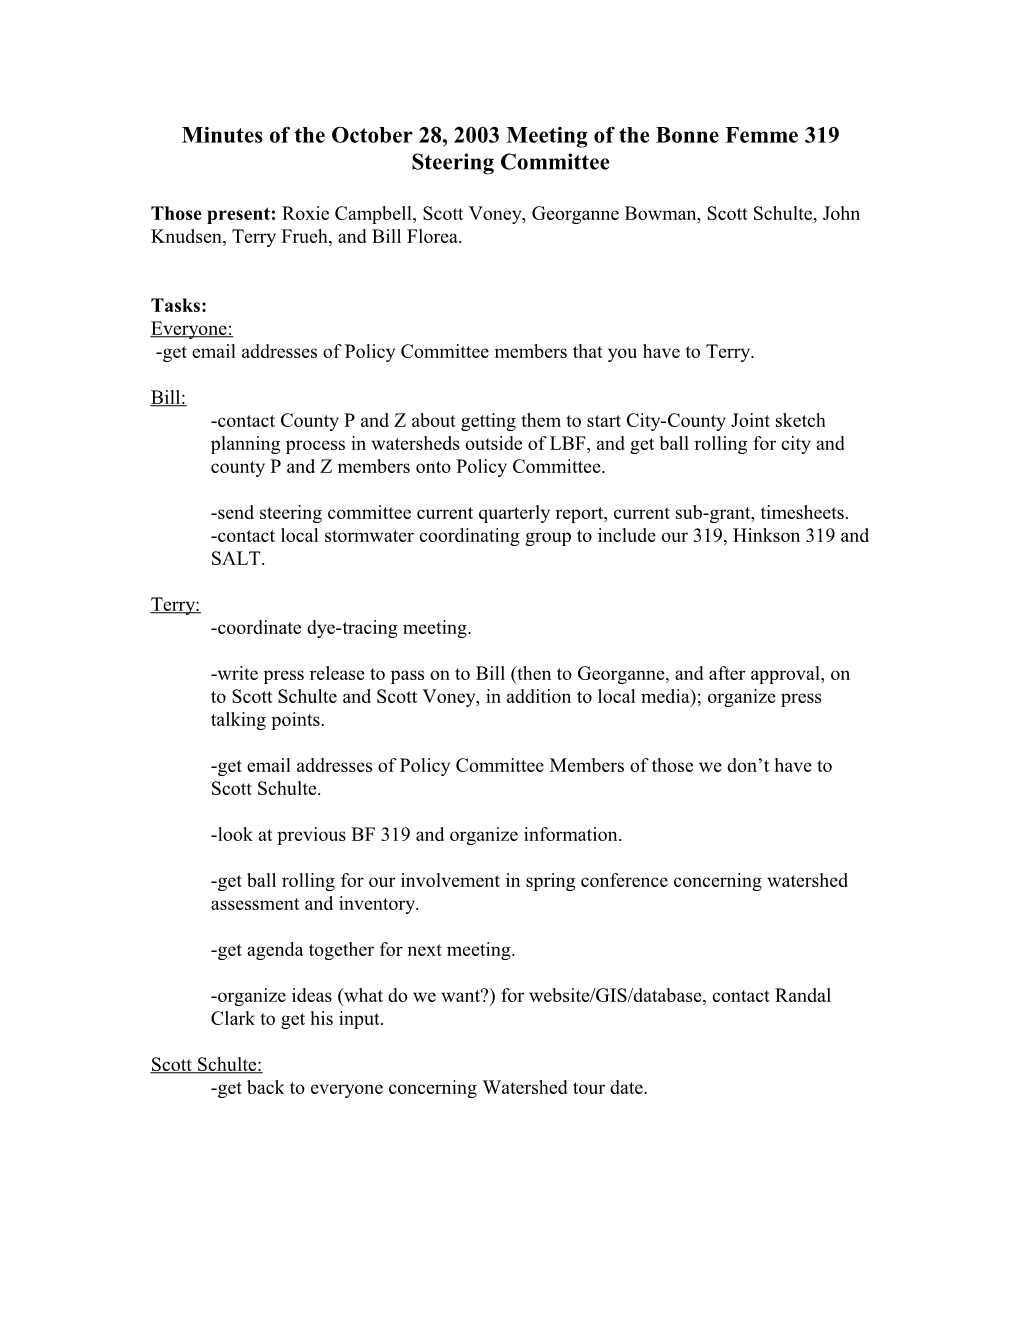 Minutes of the October 28, 2003 Meeting of the Bonne Femme 319 Steering Committee